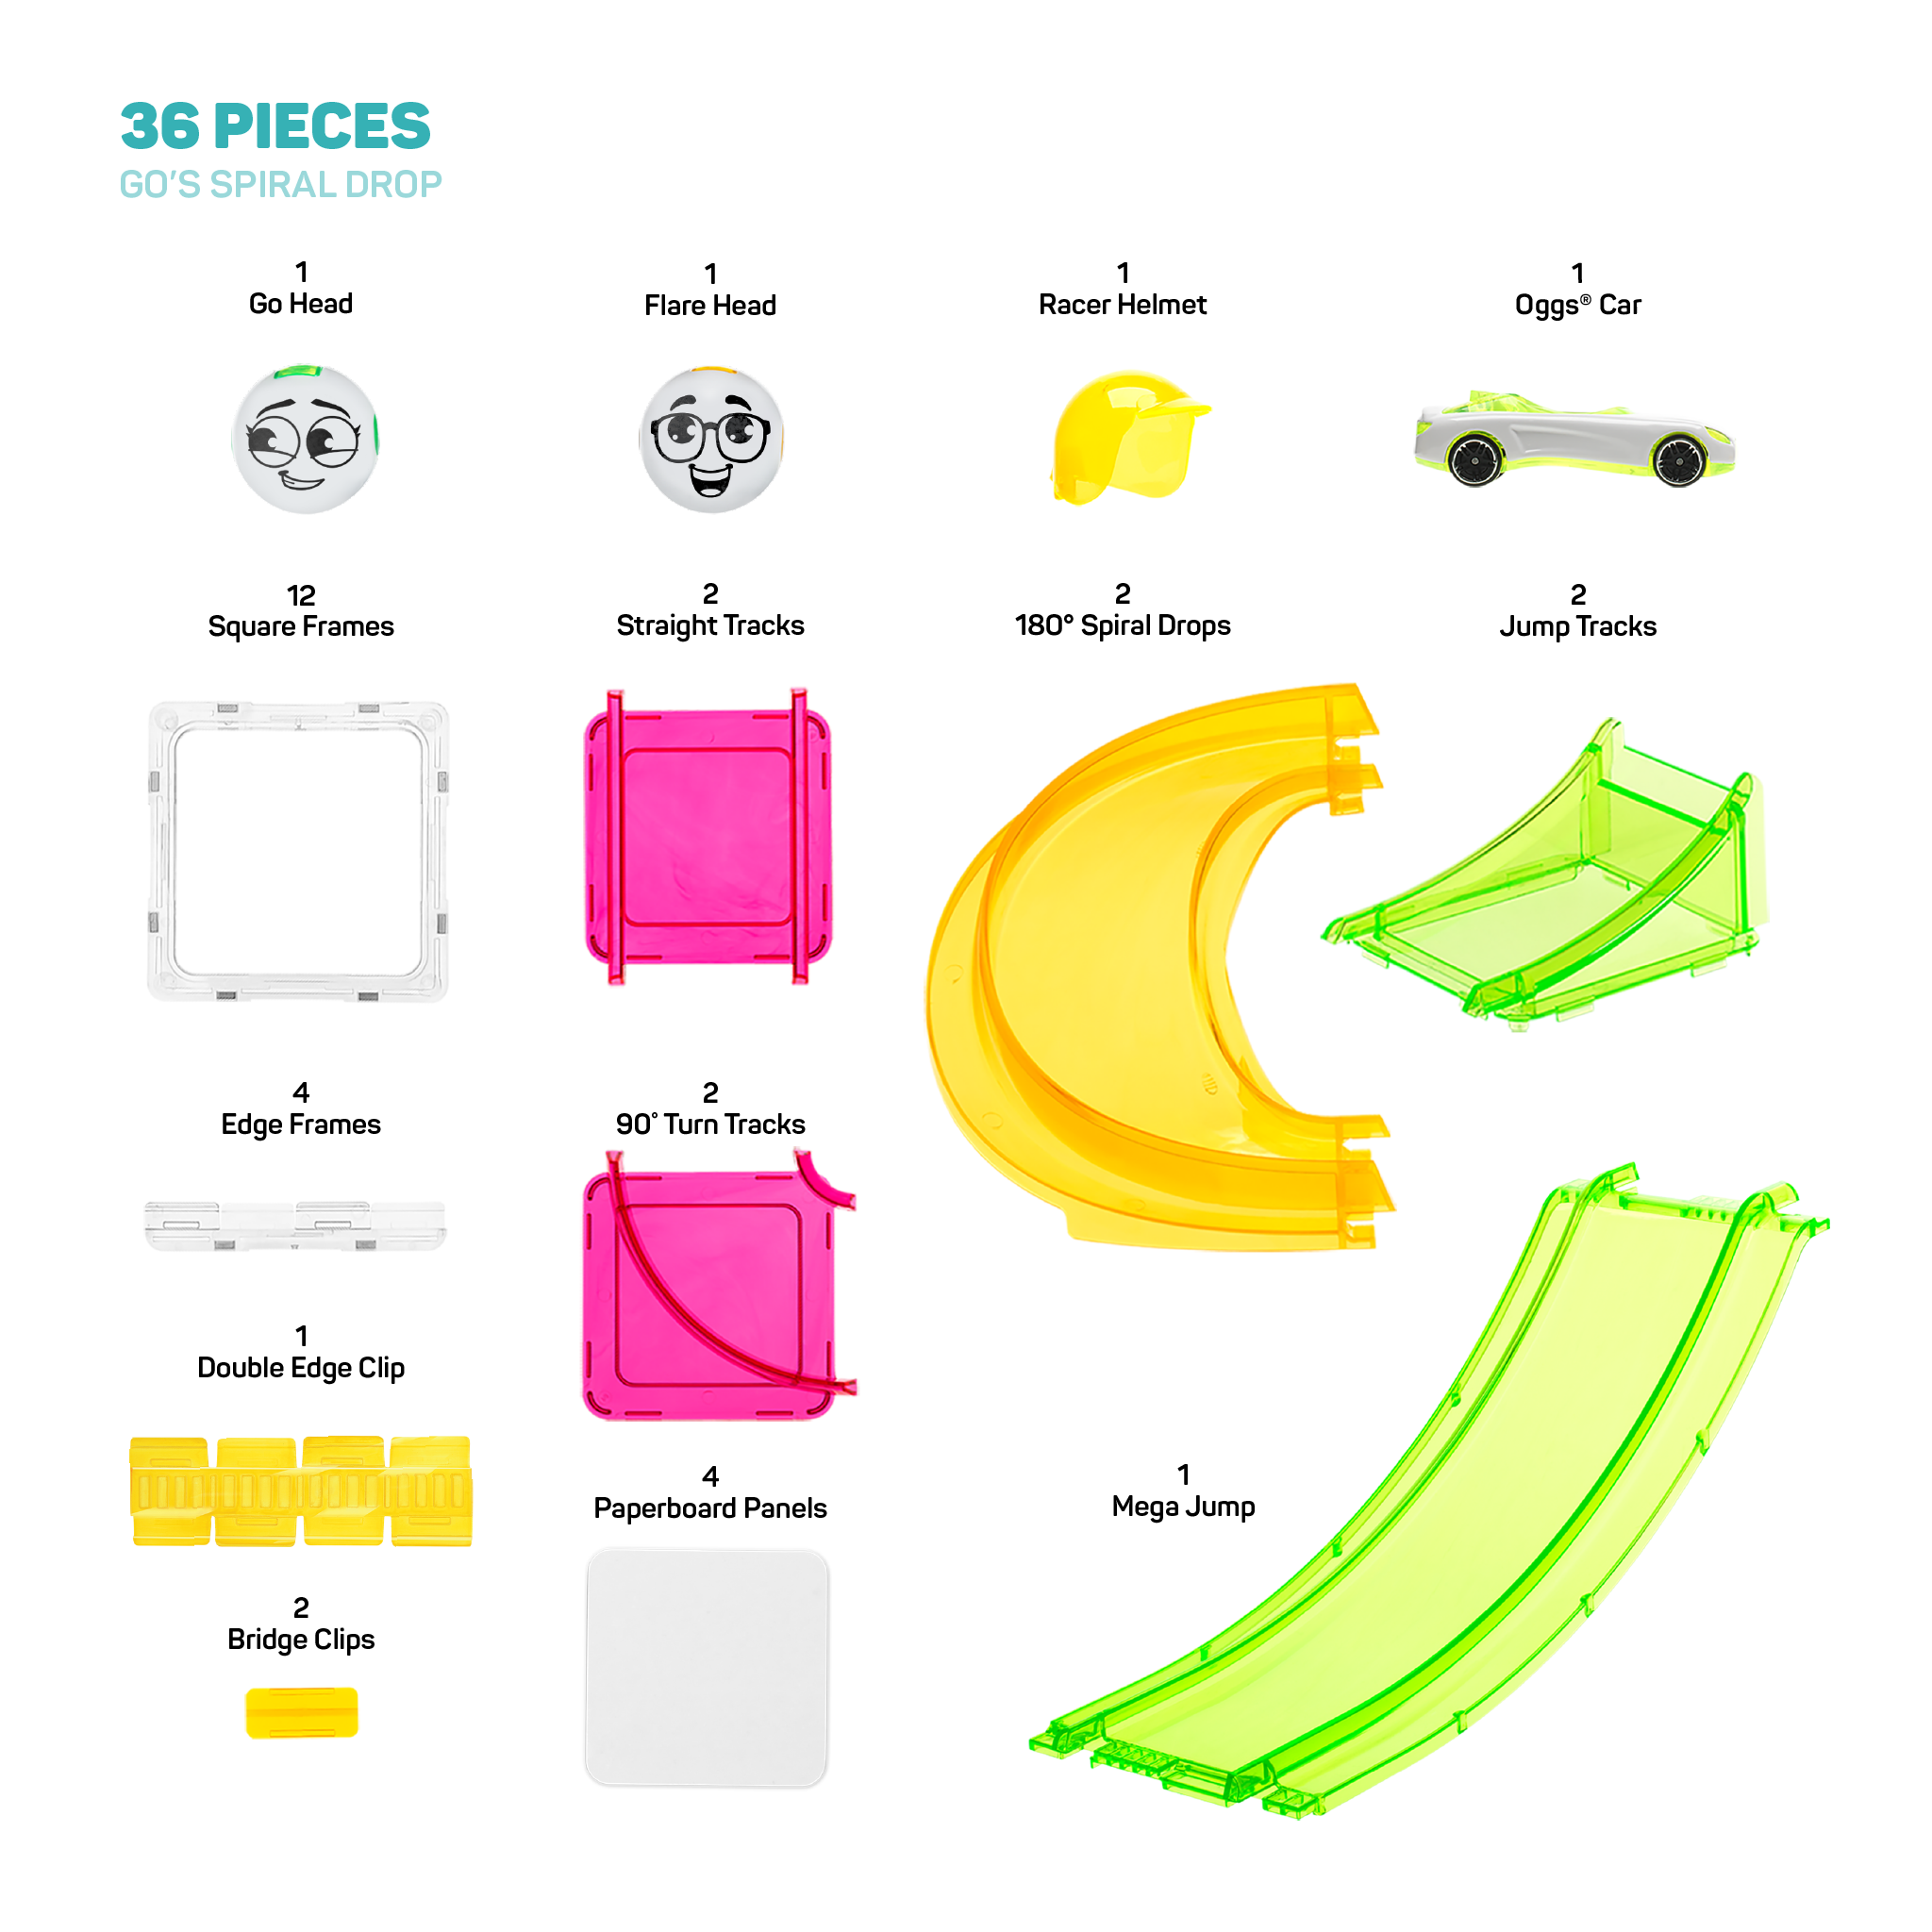 Pieces included in Go's Spiral Dro: 1 Go head, 1 Flare head, 1 racer helmet, 1 green Oggs car,  12 square frames, 2 straight tracks, 2 180 degree spiral drops, 2 jump tracks, 4 edge frames, 2 90 degree turn tracks, 1 ouble edge clip, 4 paperboard panels, 2 birdge clips, 1 mega jump